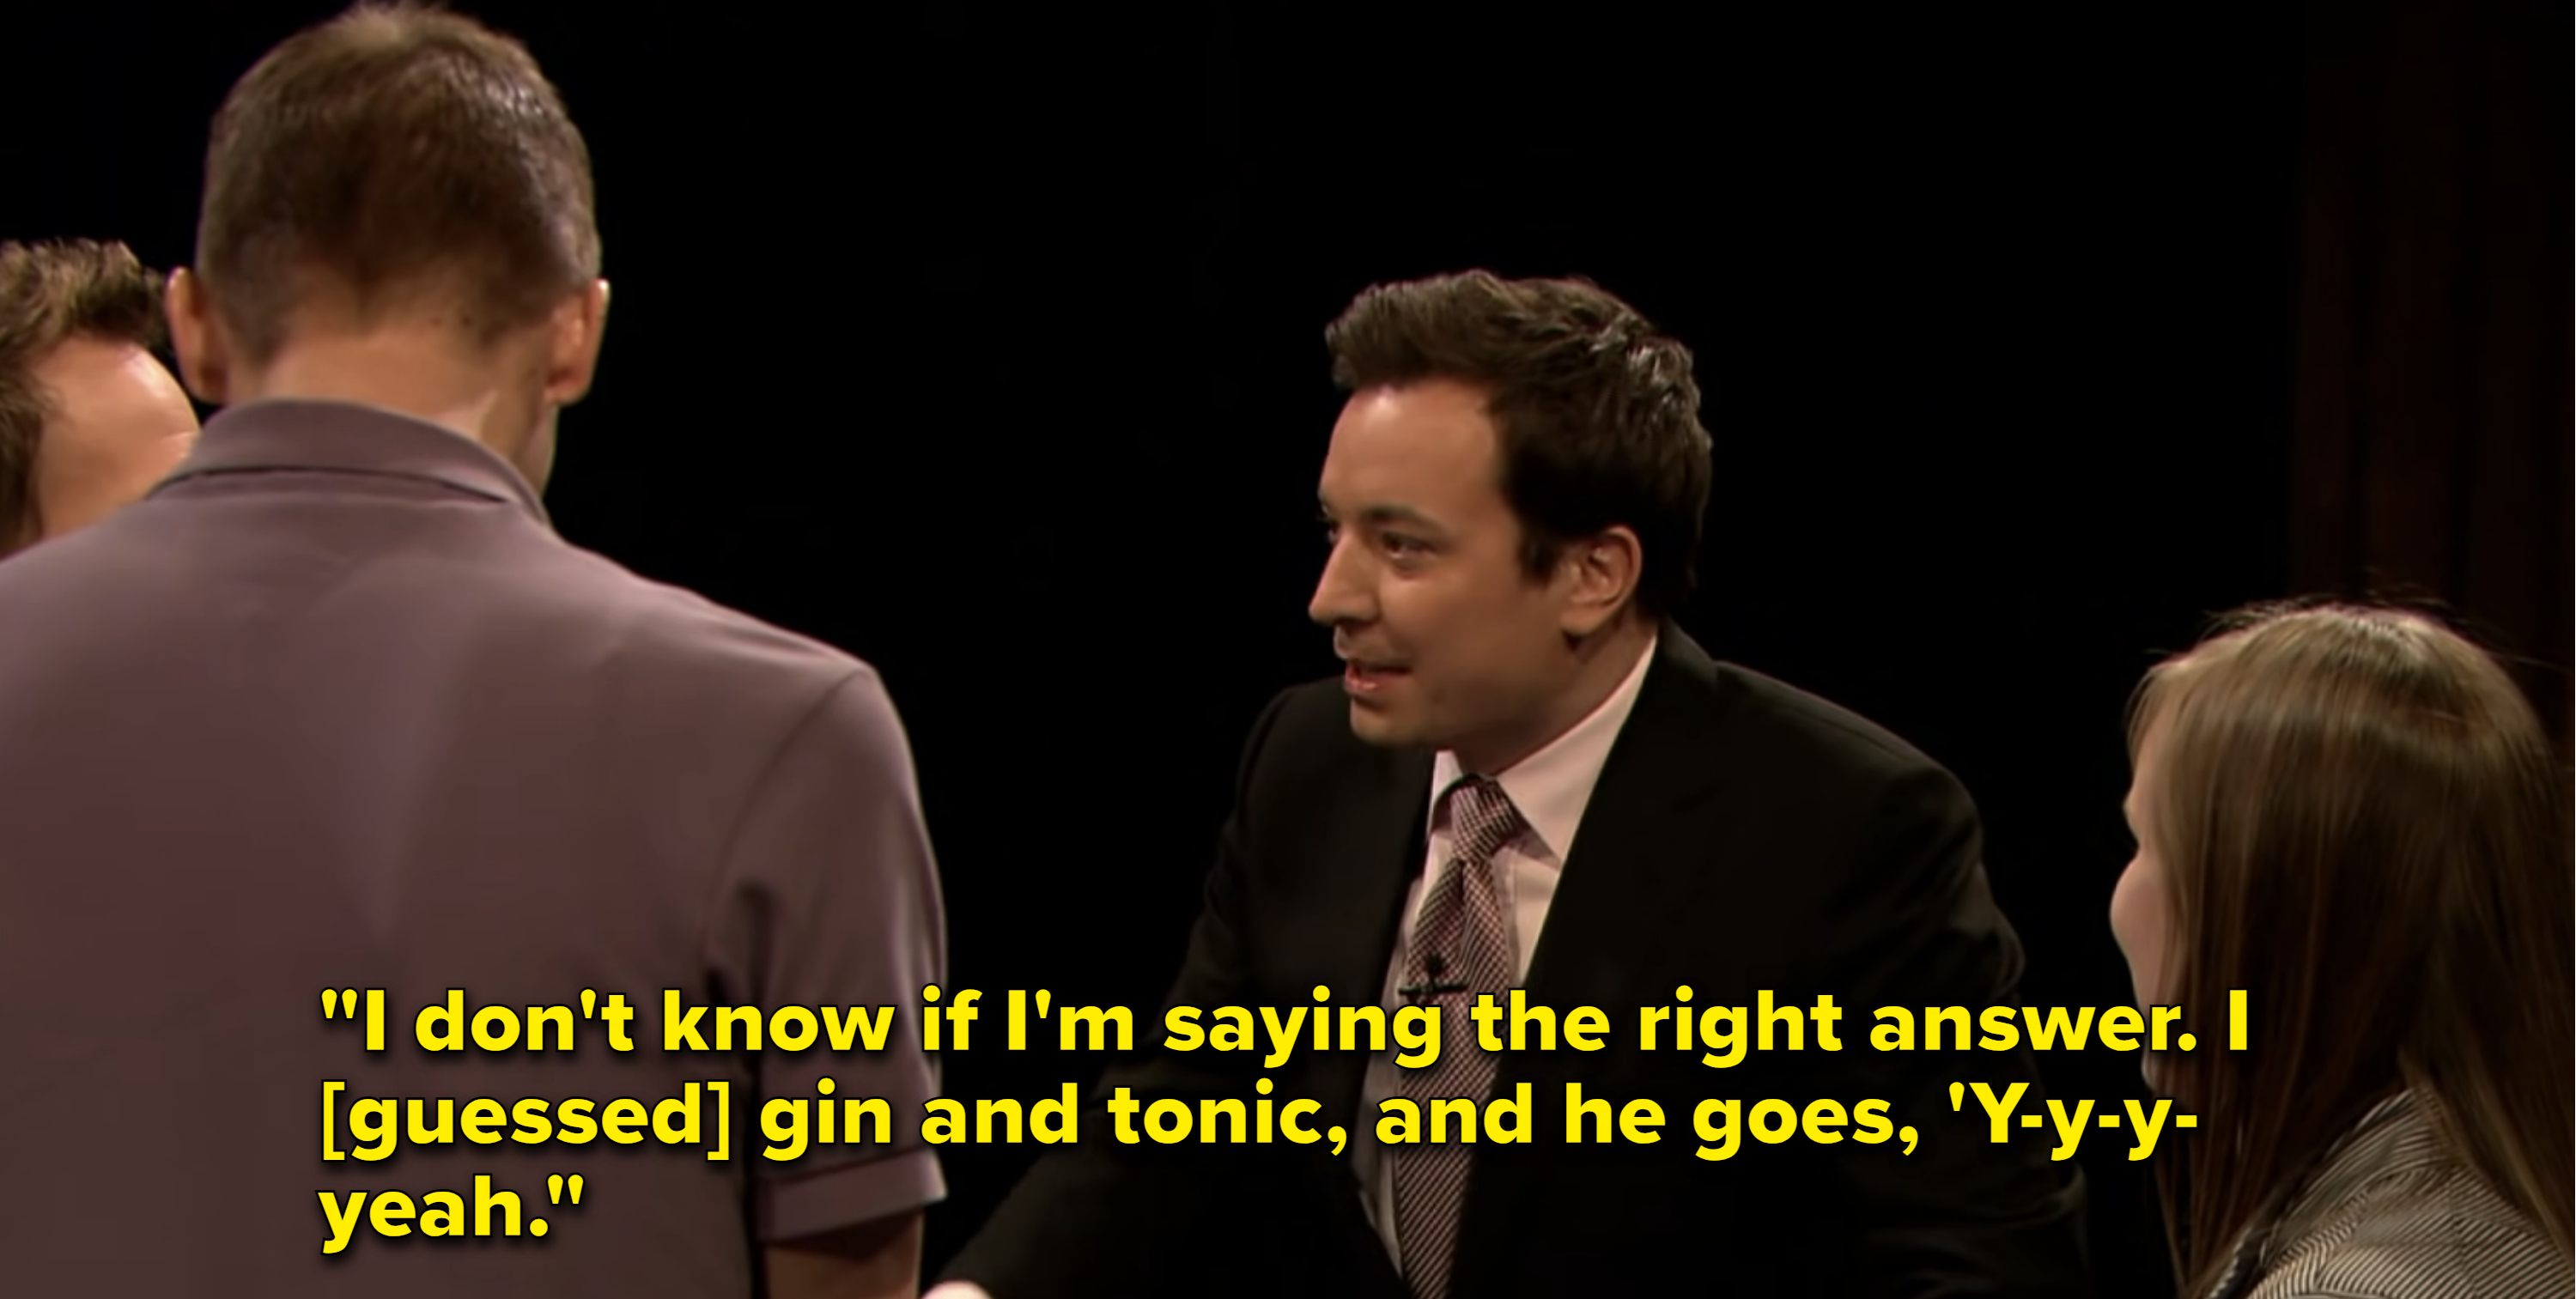 Jimmy mocks his teammate&#x27;s stutter when he says, &quot;I don&#x27;t know if I&#x27;m saying the right answer. I [guessed] gin and tonic, and he goes, &#x27;Y-y-y-yeah&quot;